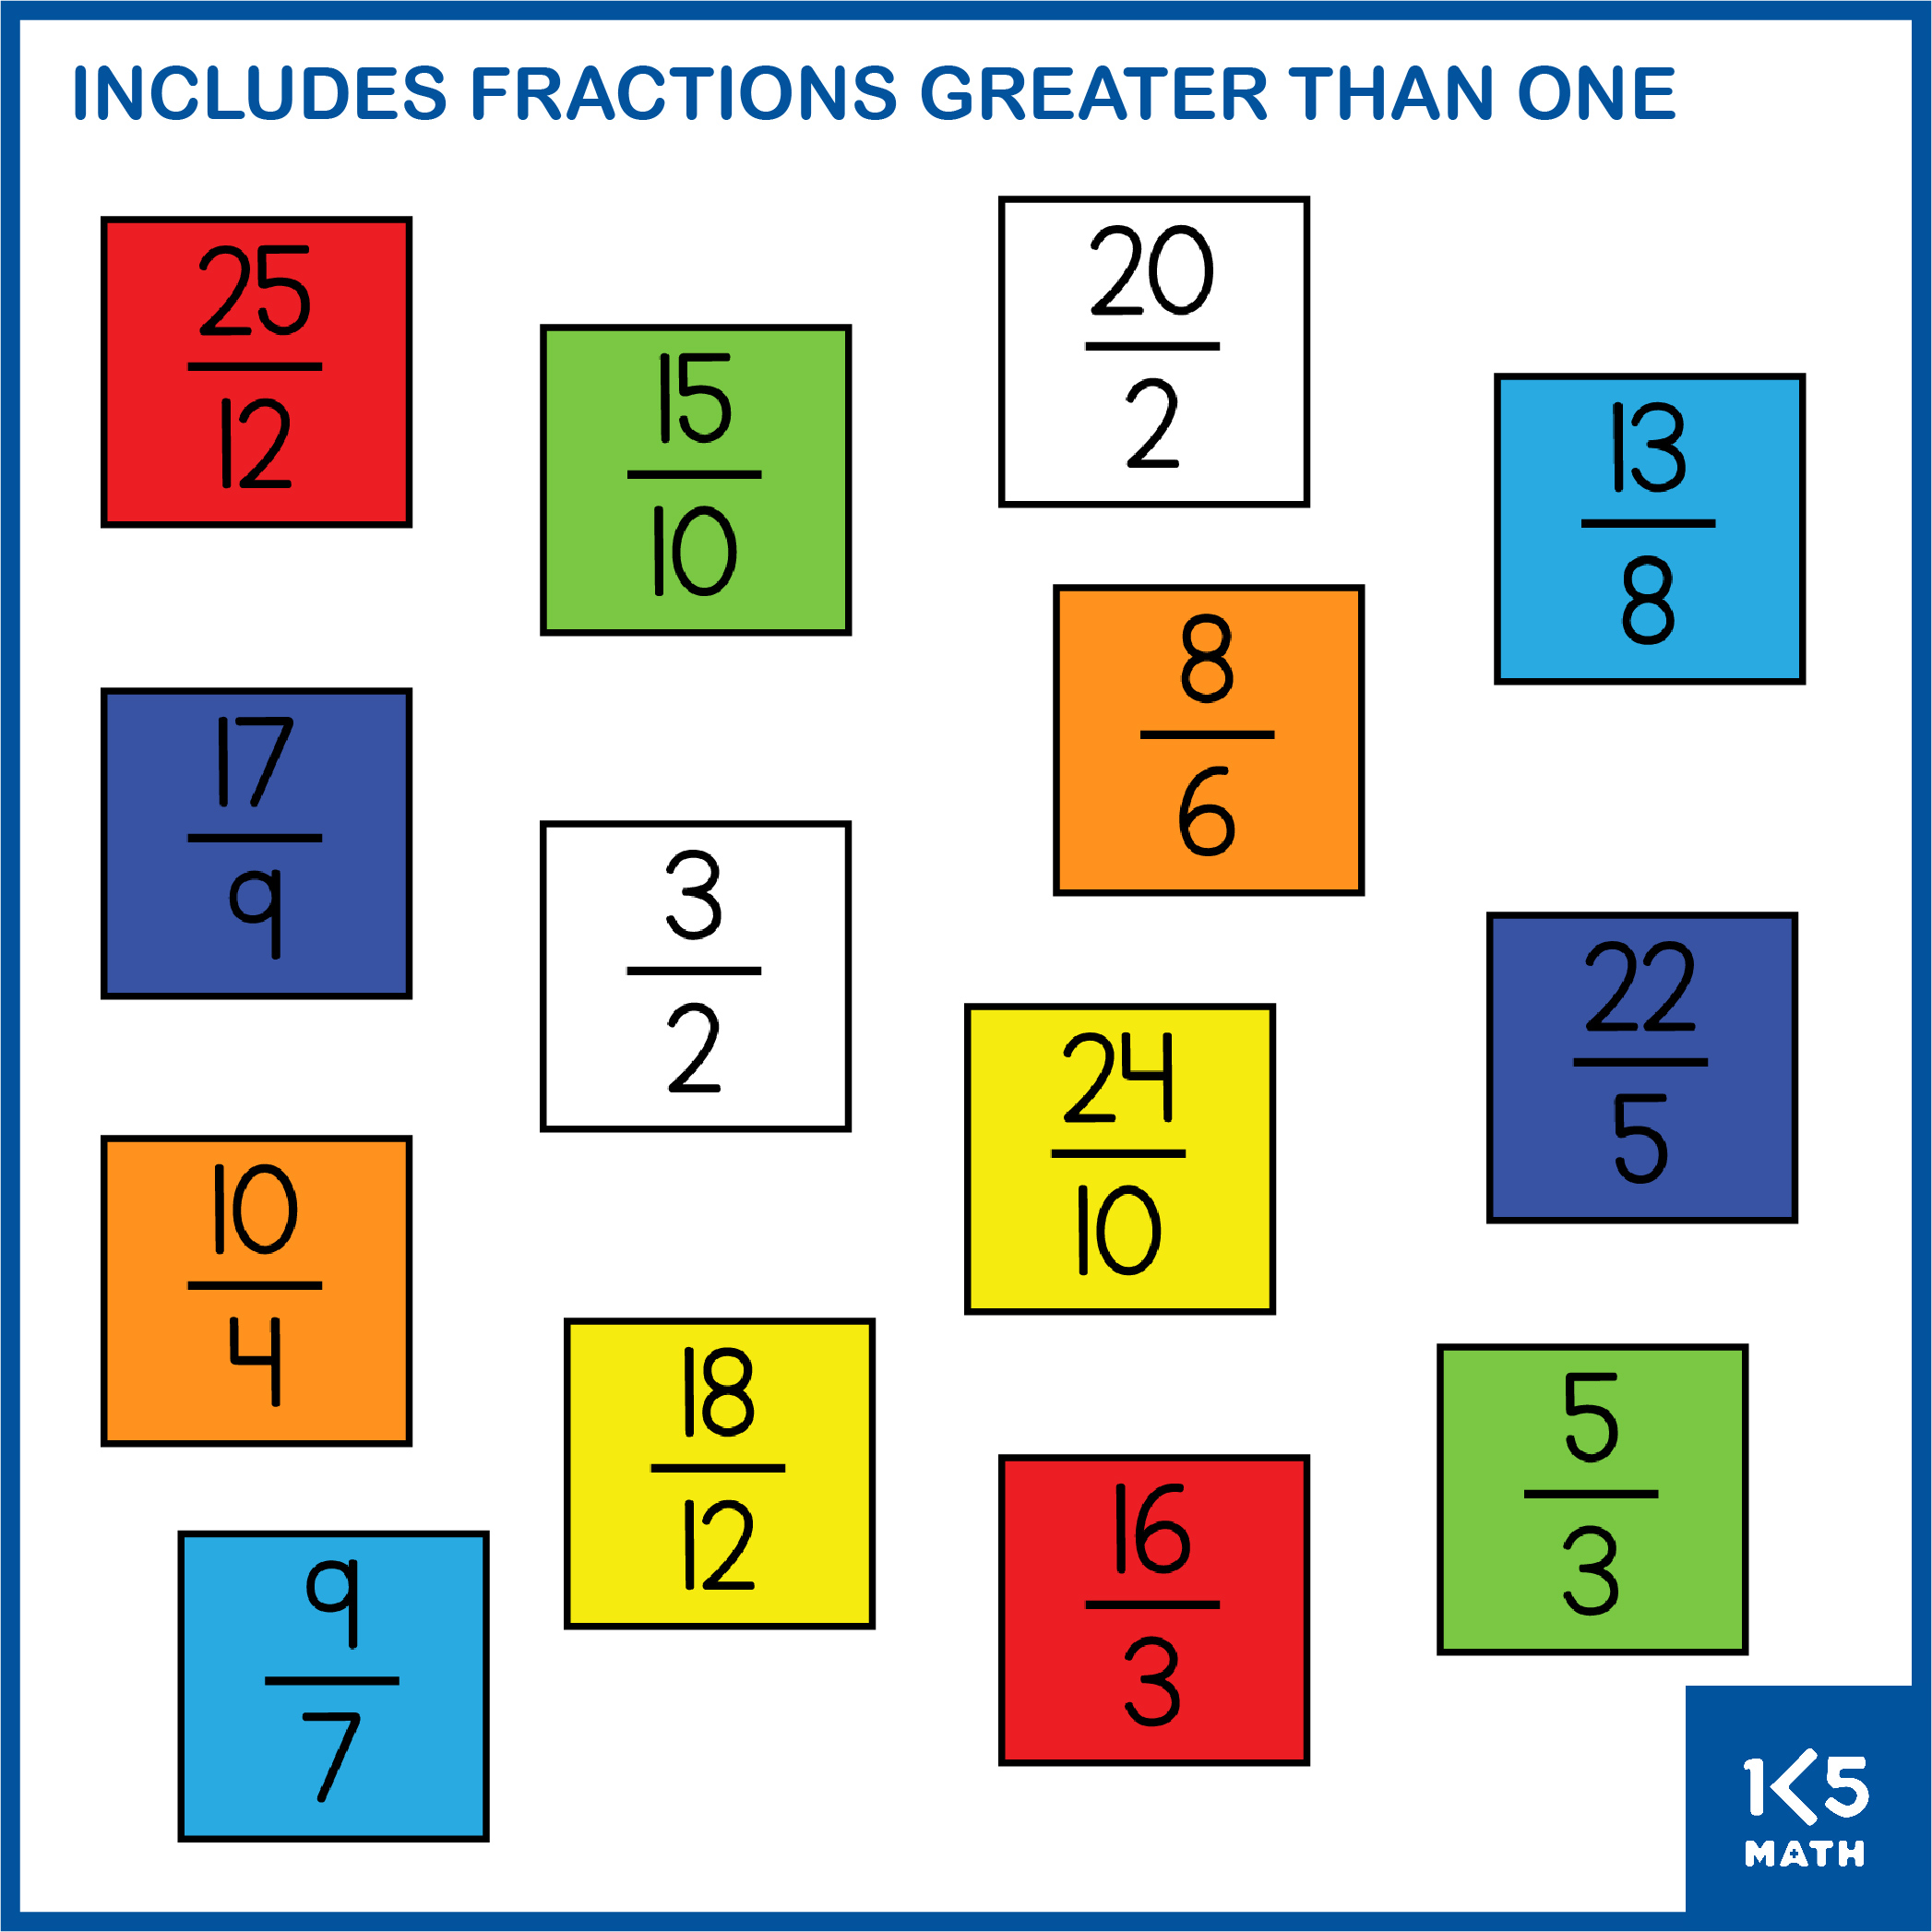 Fraction Tiles Clip Art with fractions greater than ONE